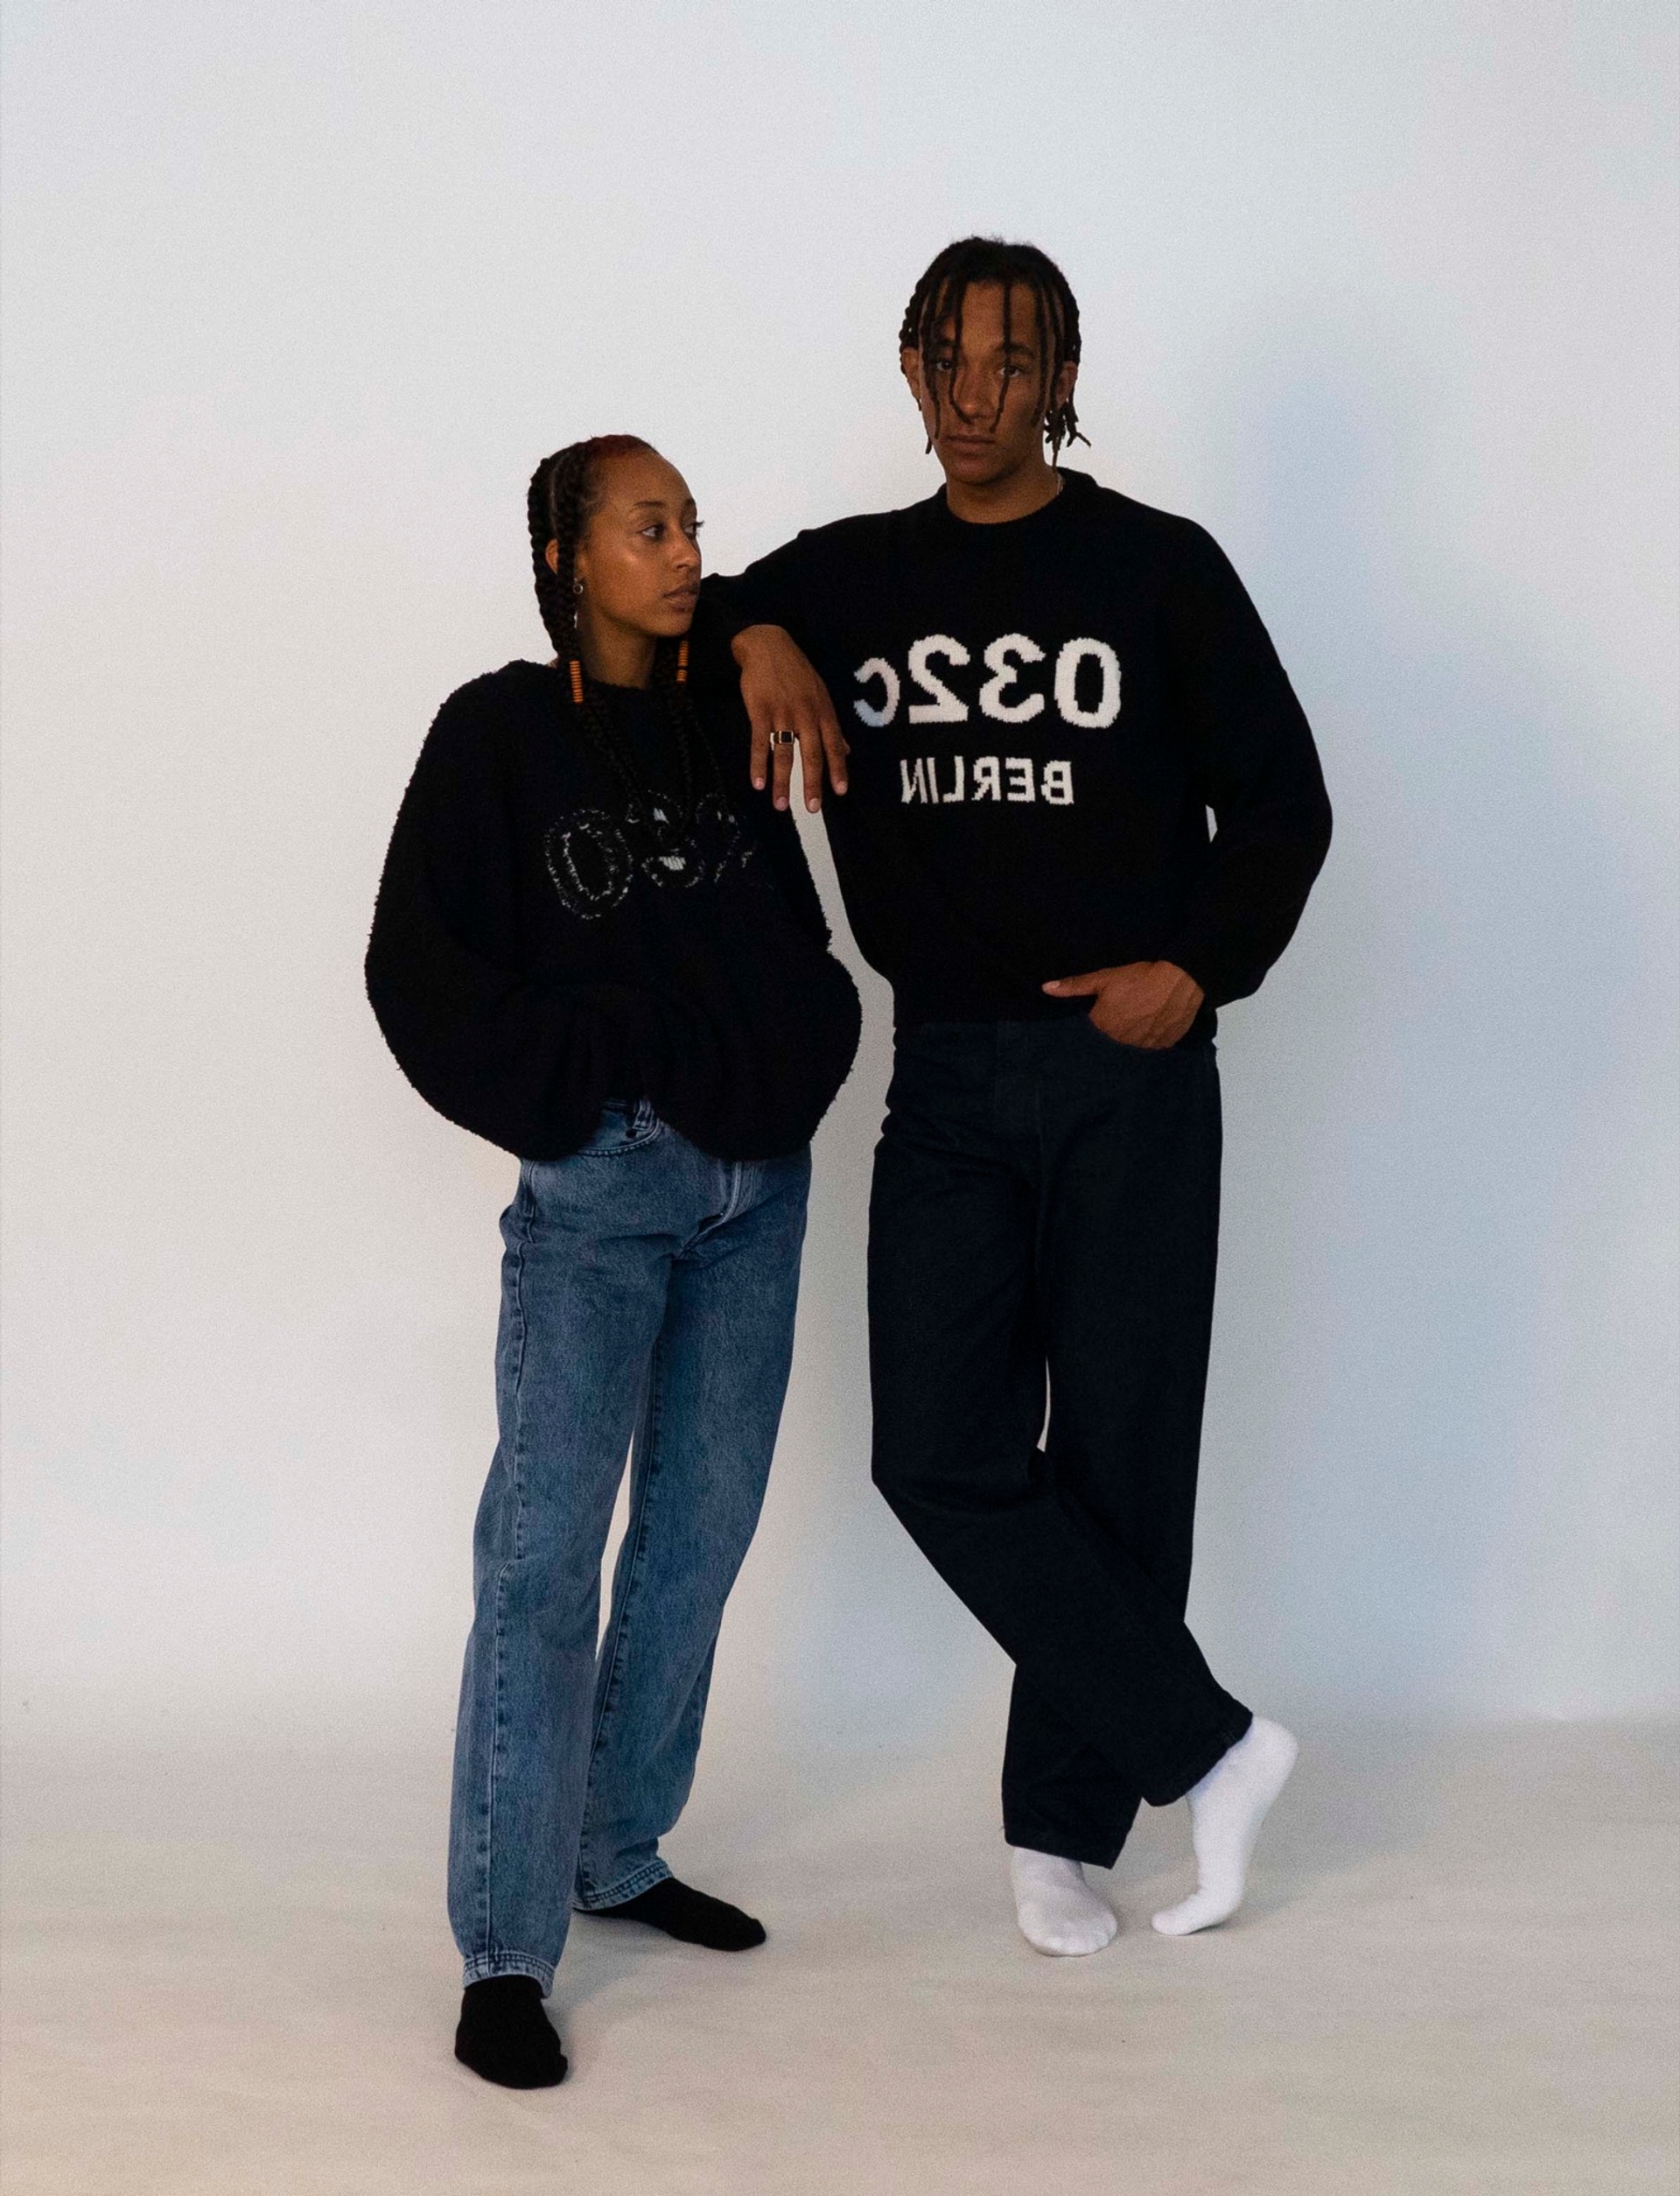 Libell wears the 032c LoveSexDreams Terry logo pullover with the "Next" jeans in light blue. Buyegi wears the "Selfie" knit pullover with the "Next" jeans in dark blue